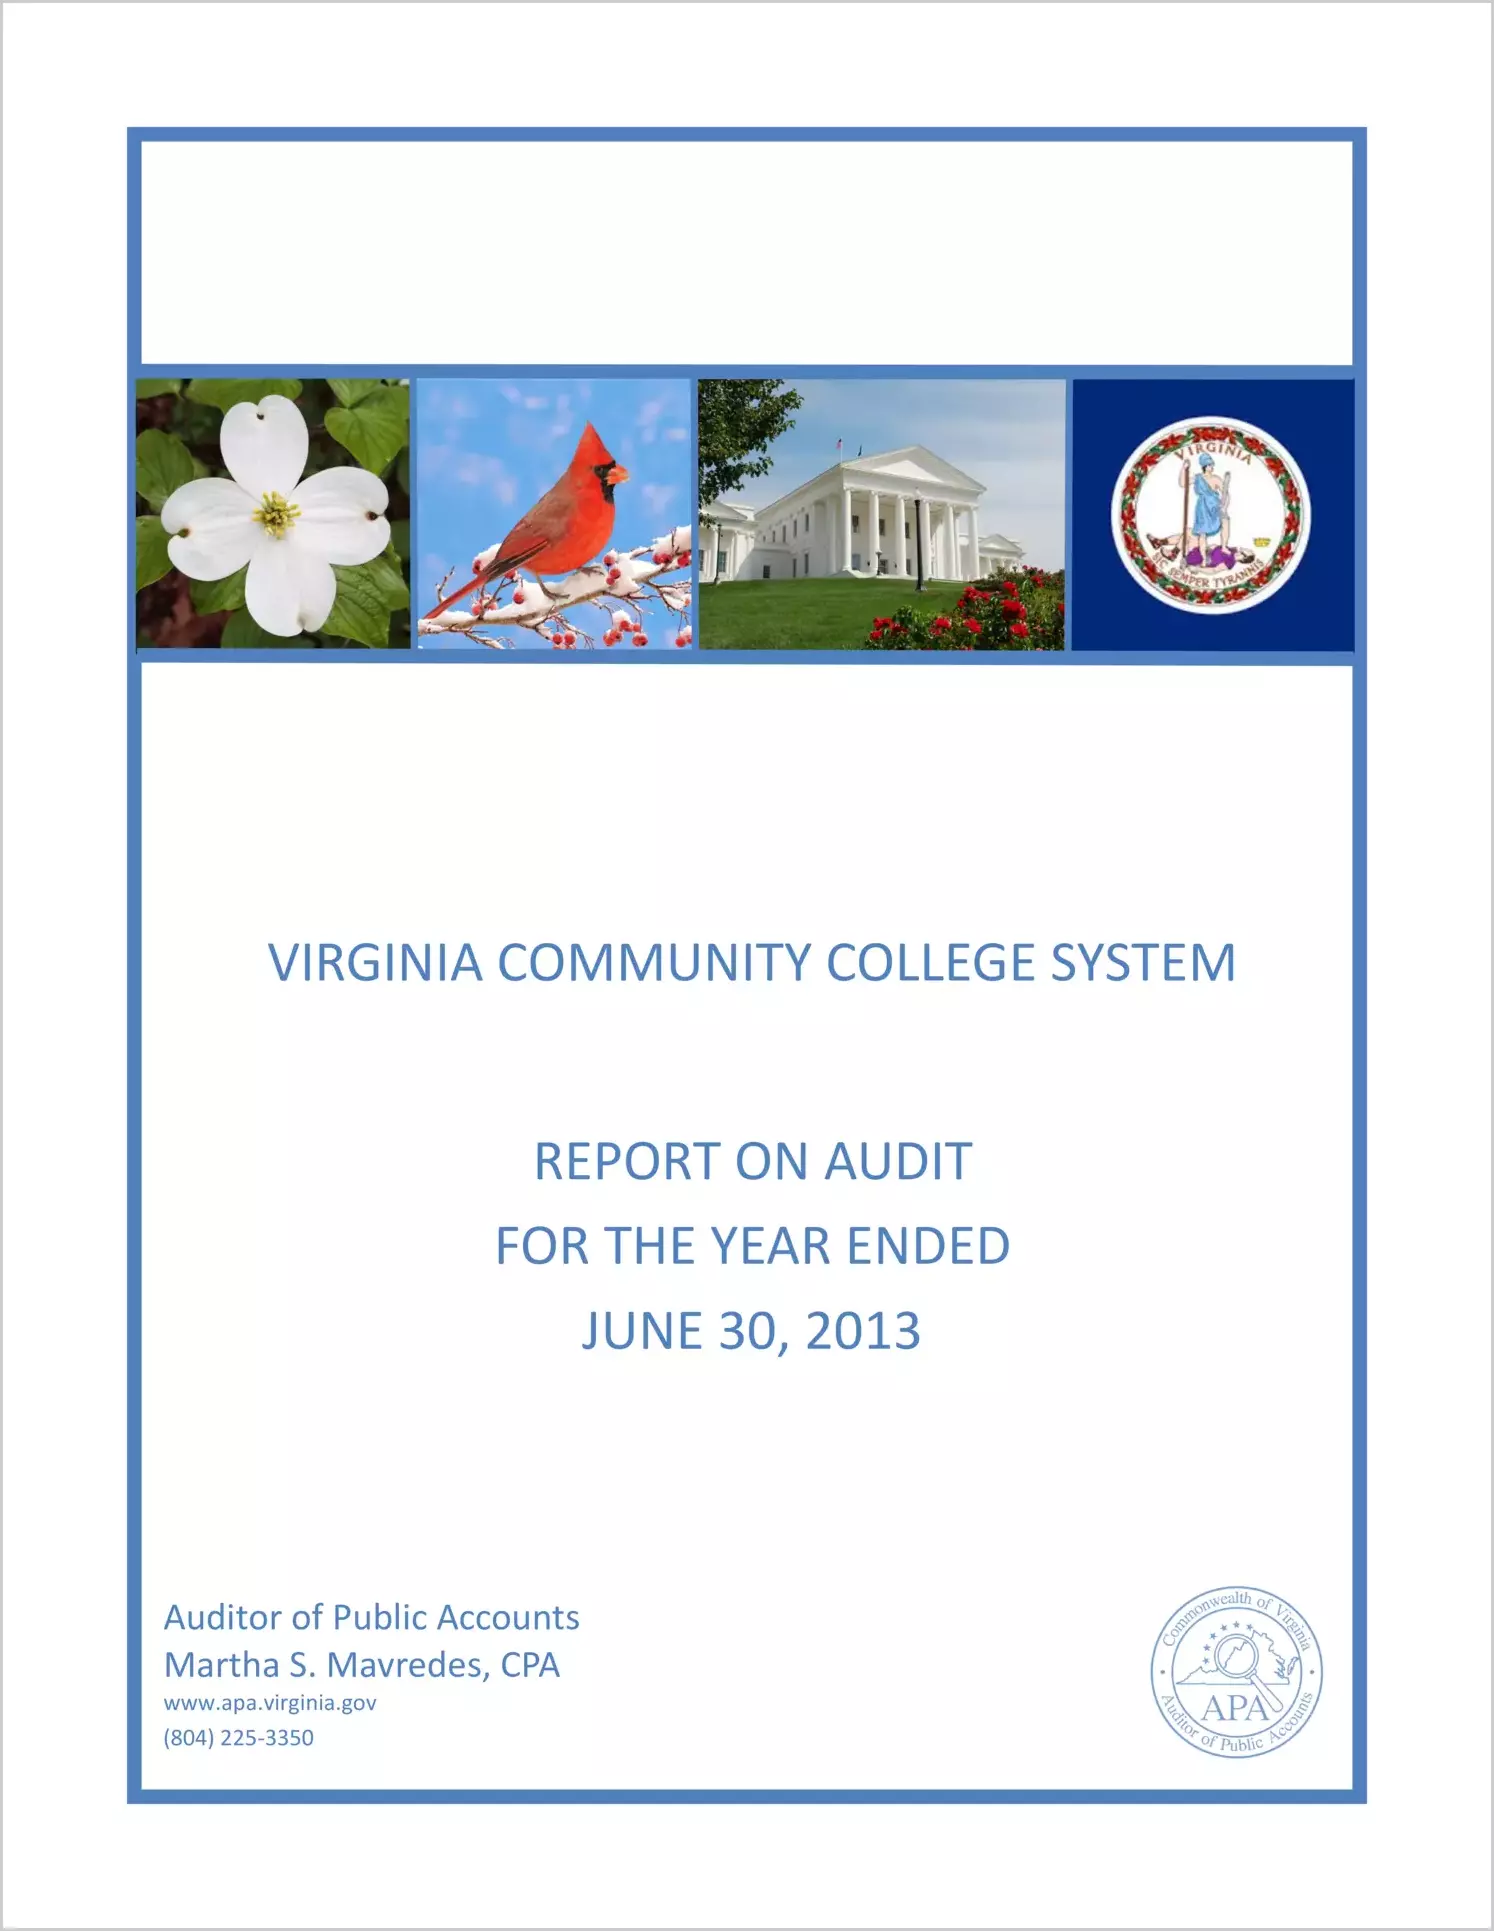 Virginia Community College System for the year ended June 30, 2013